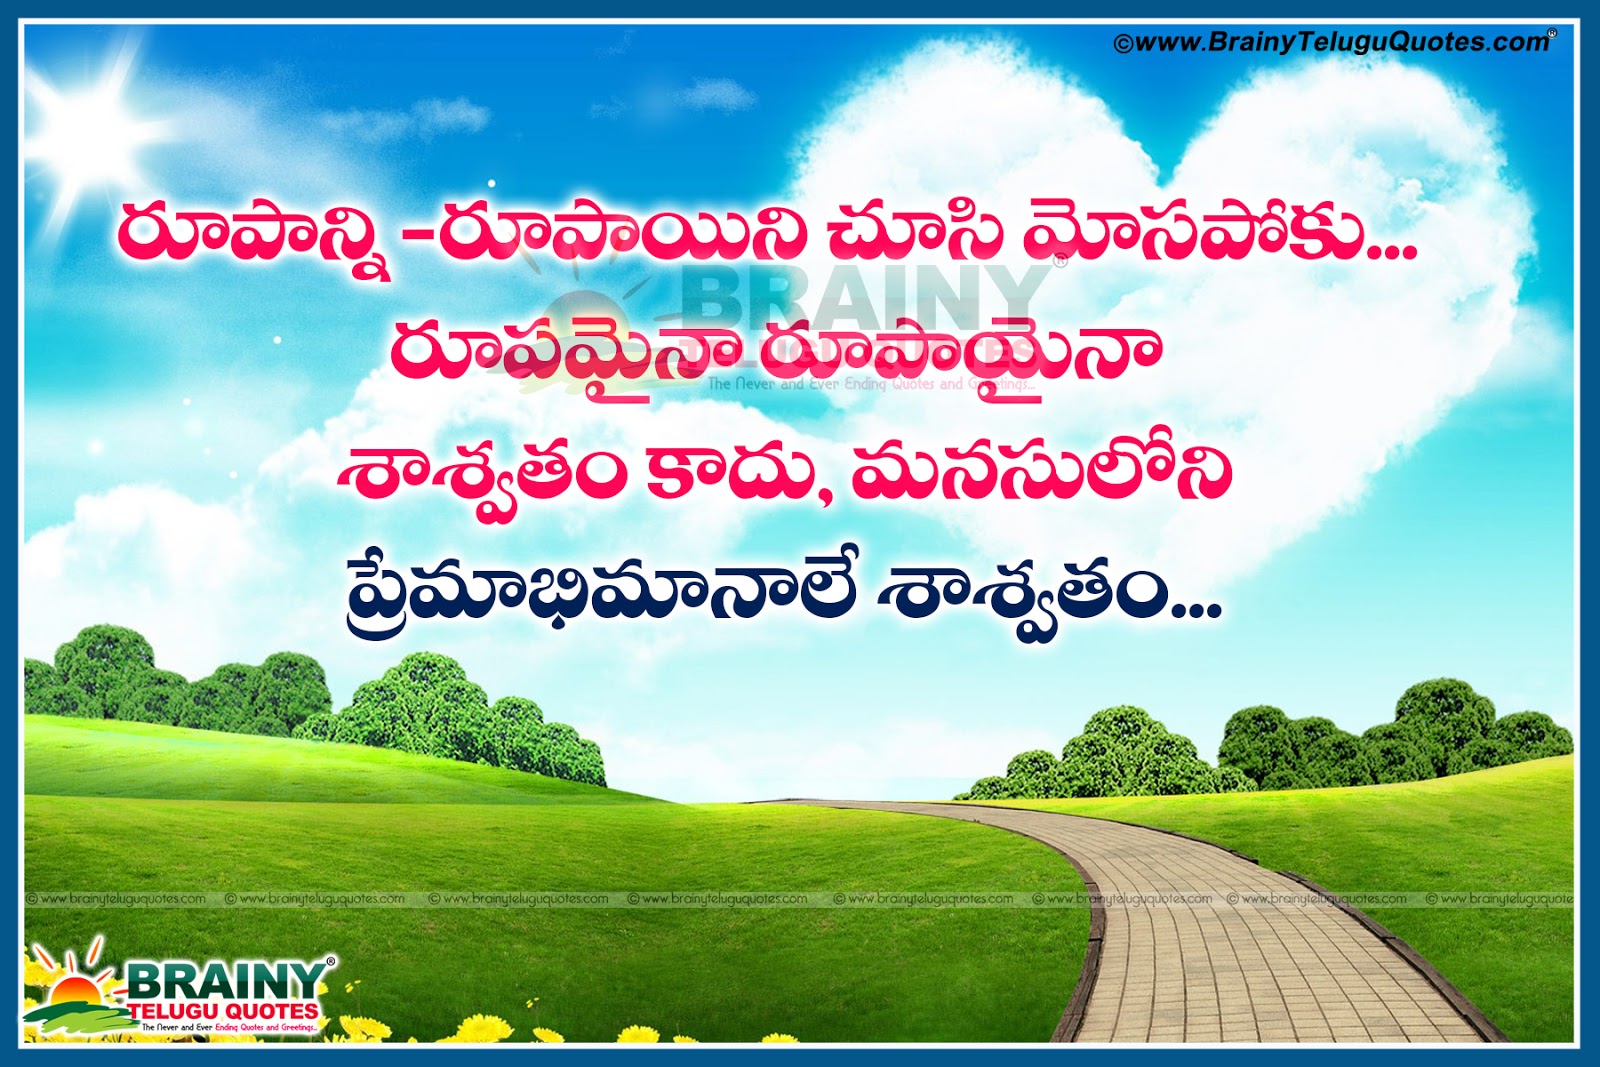 happiness quotes in telugu Friendship quotes in telugu Inspirational quotes in telugu Heart